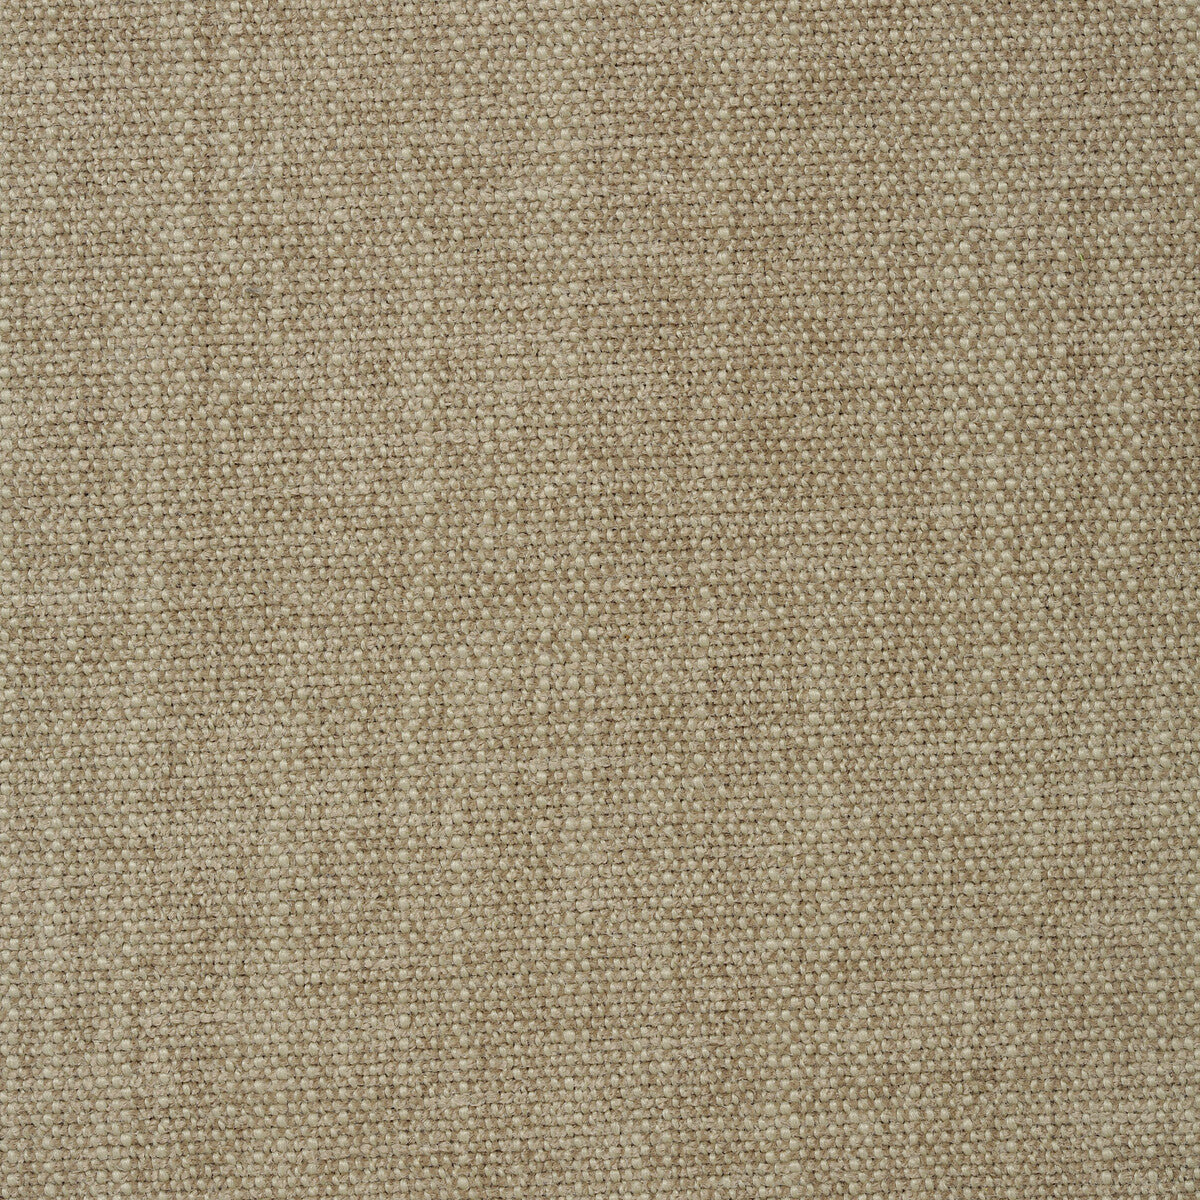 Kravet Smart fabric in 35113-16 color - pattern 35113.16.0 - by Kravet Smart in the Performance Crypton Home collection